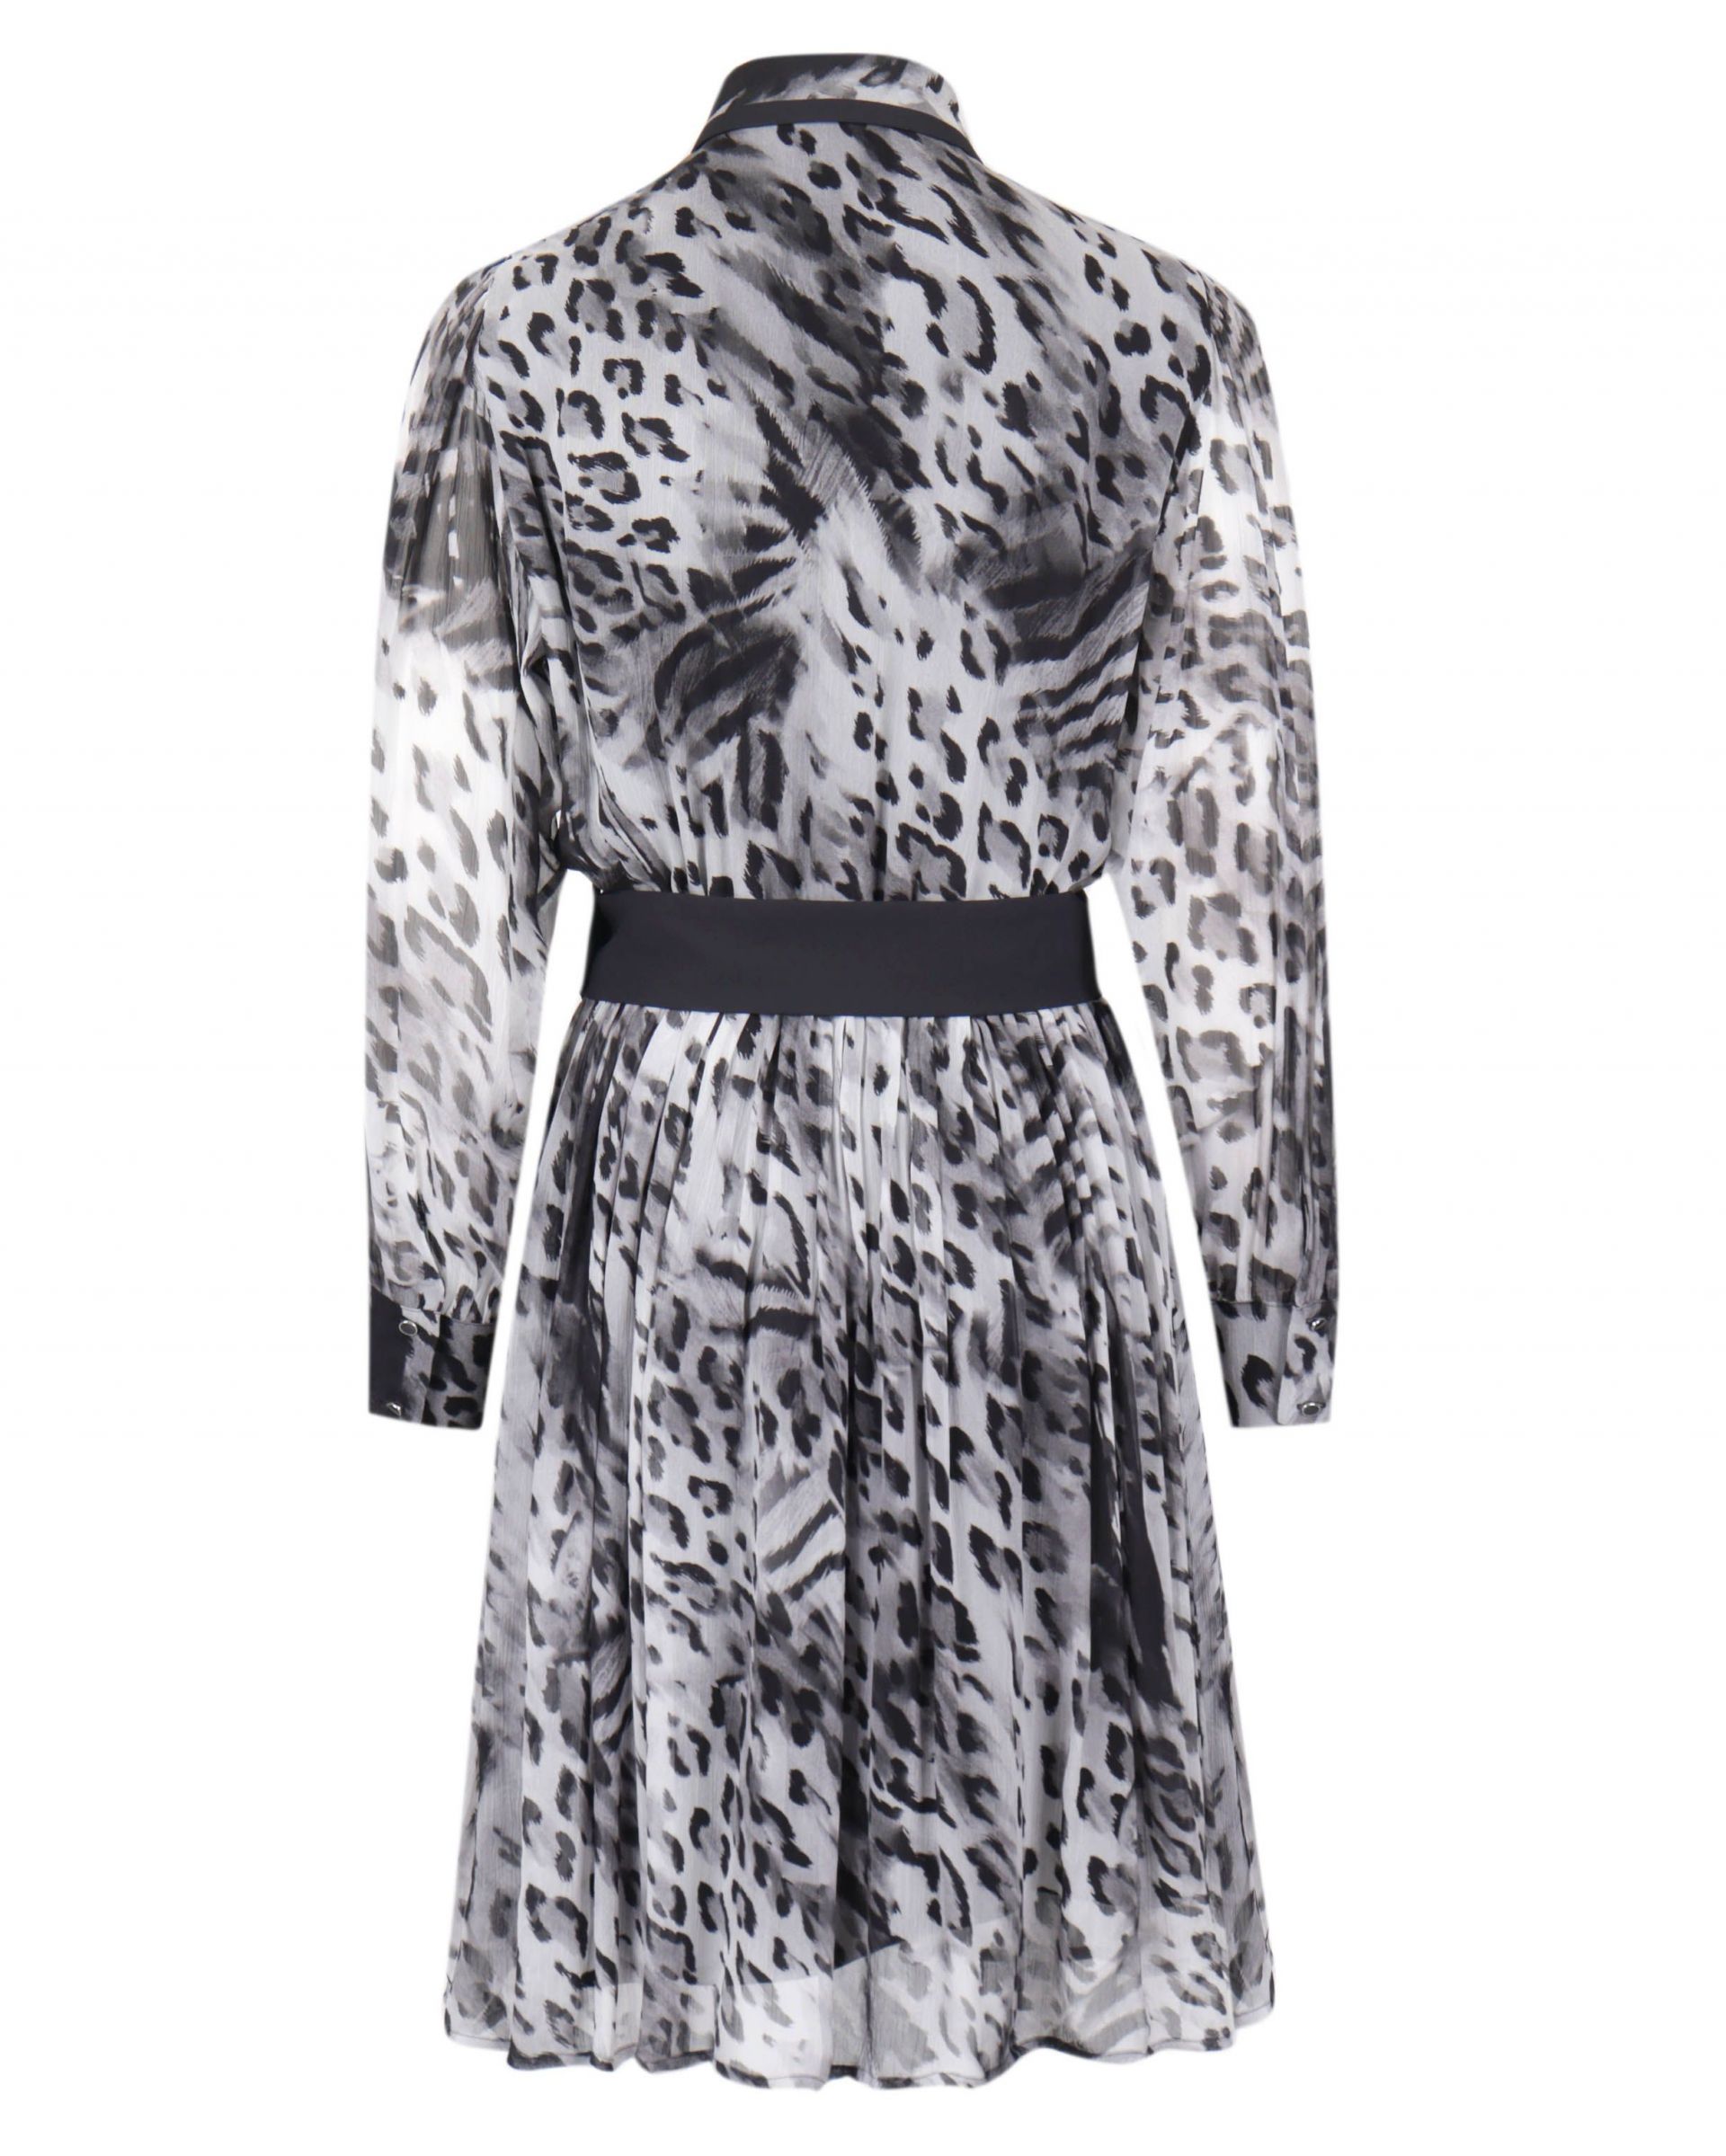 Rayon dress with leopard print 1